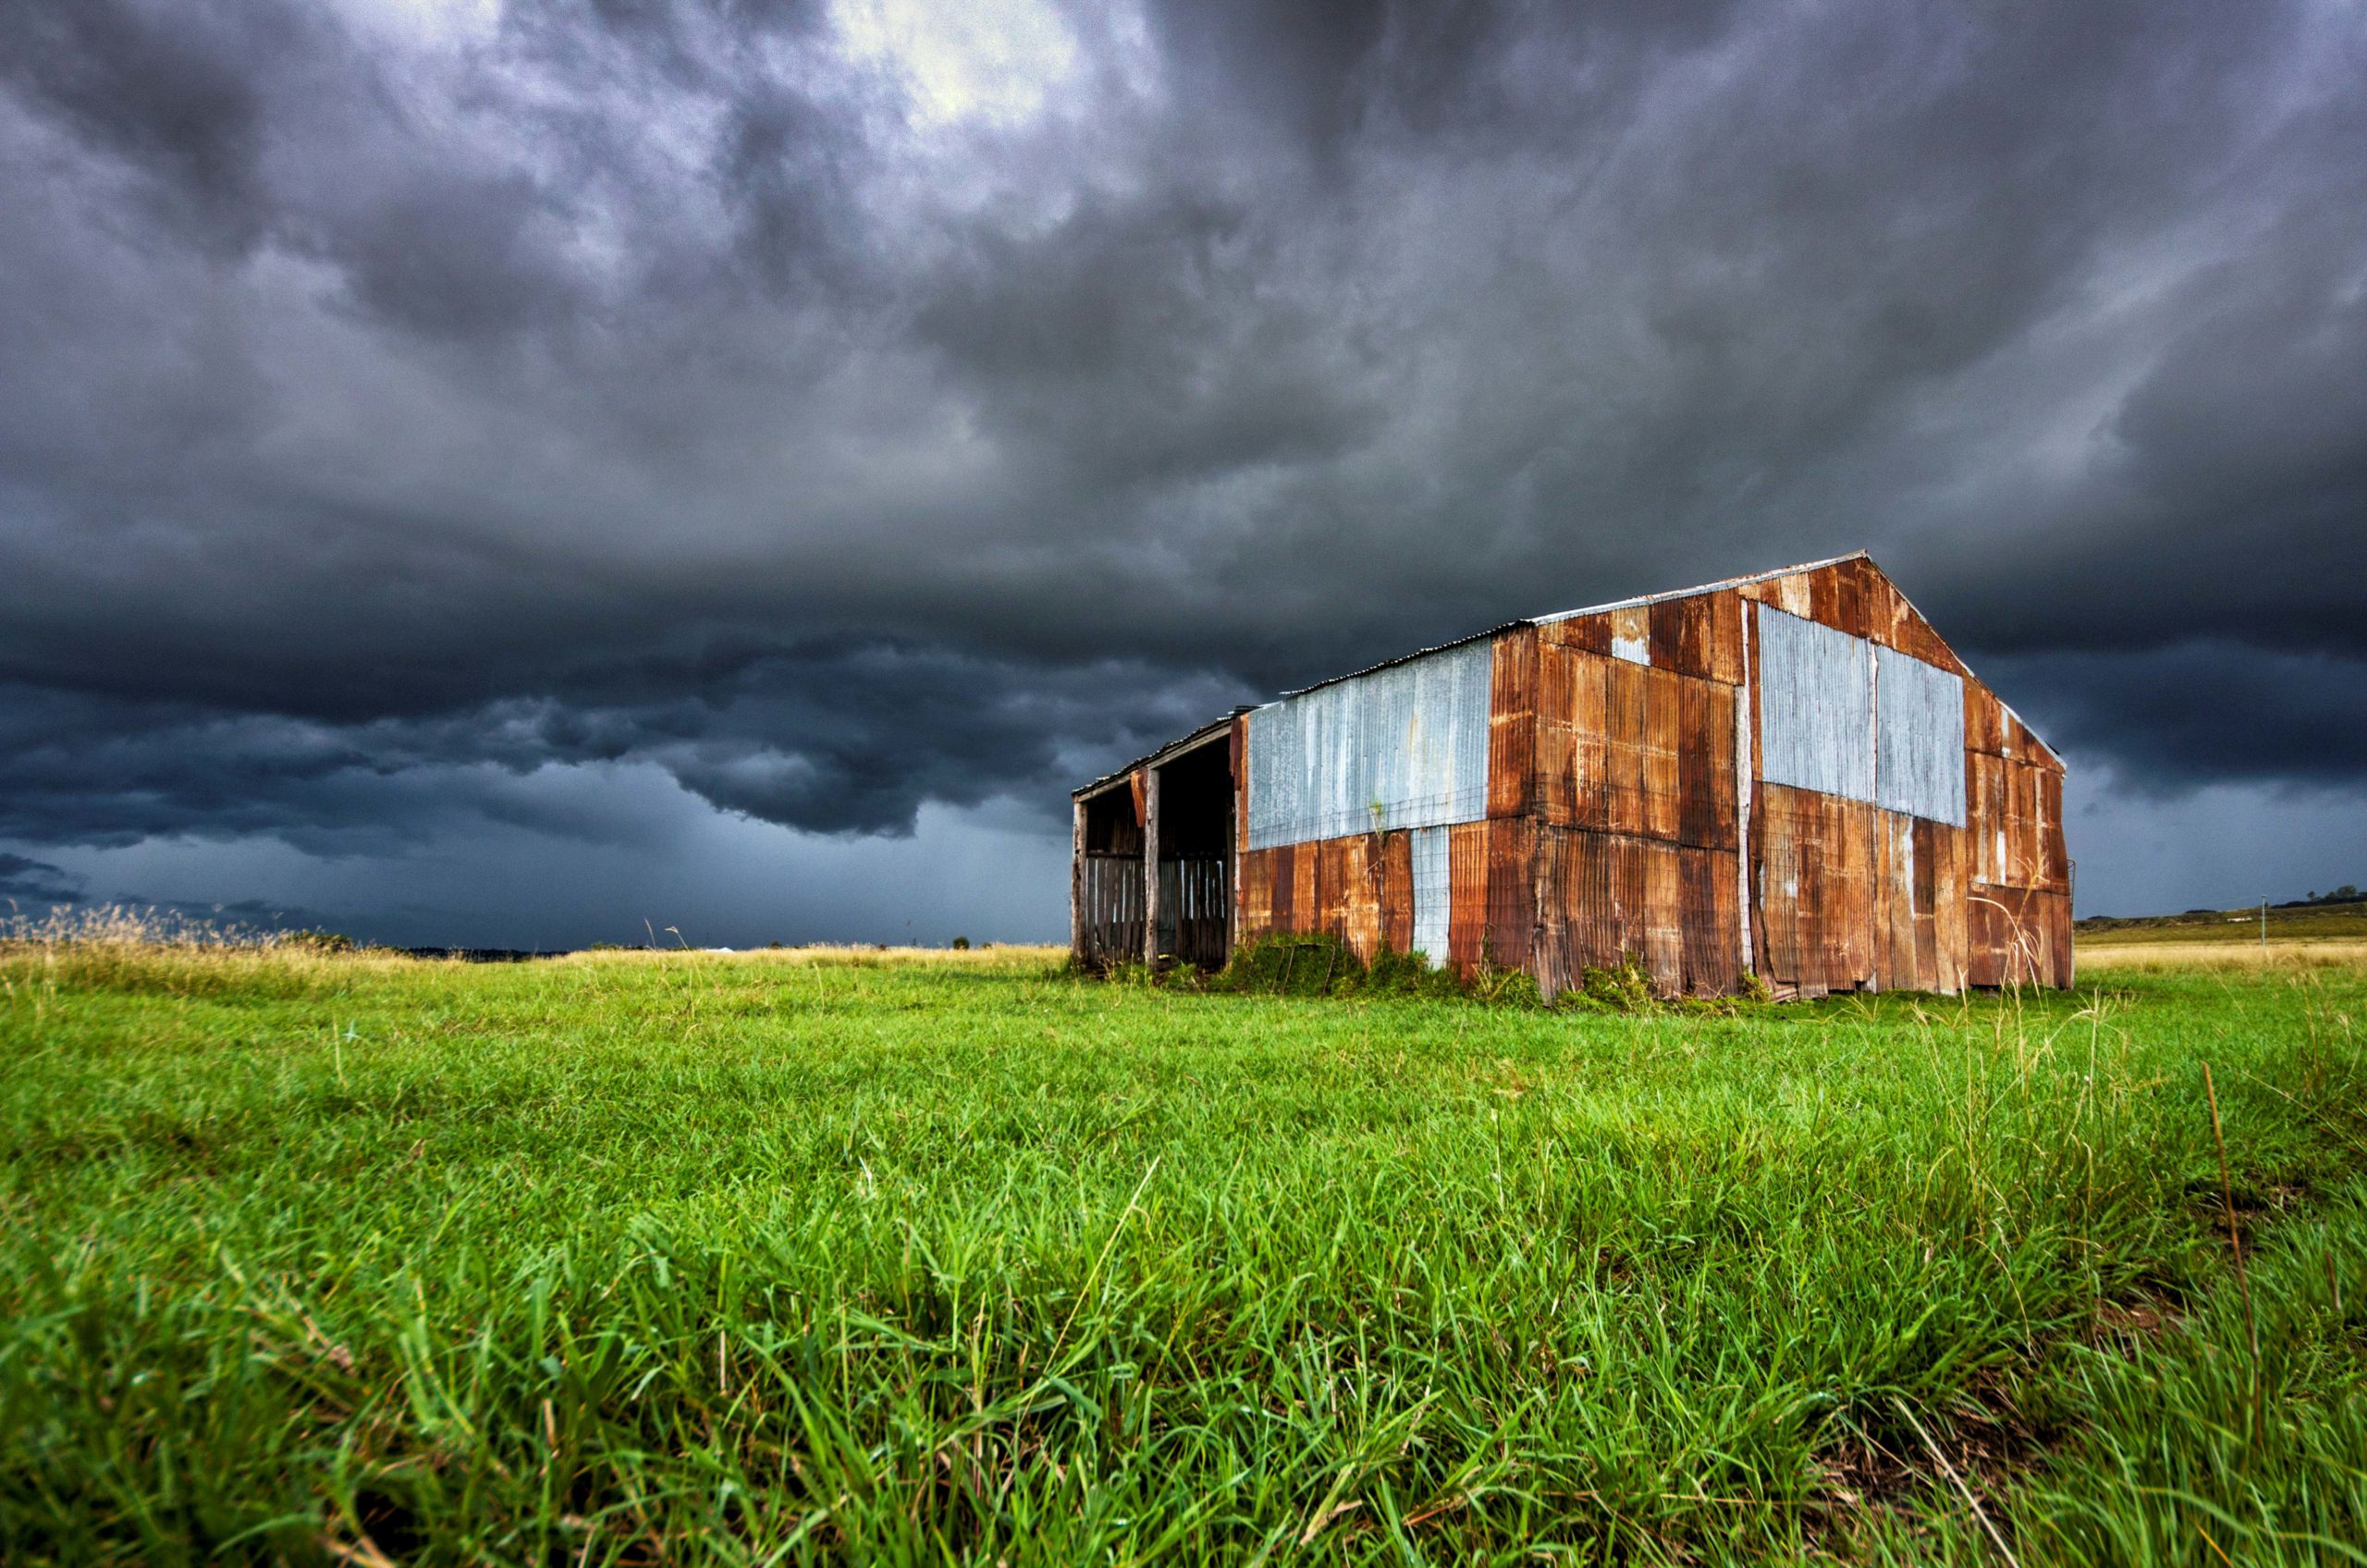 An old tin farm shed stands in a field while a storm brews in the distance.